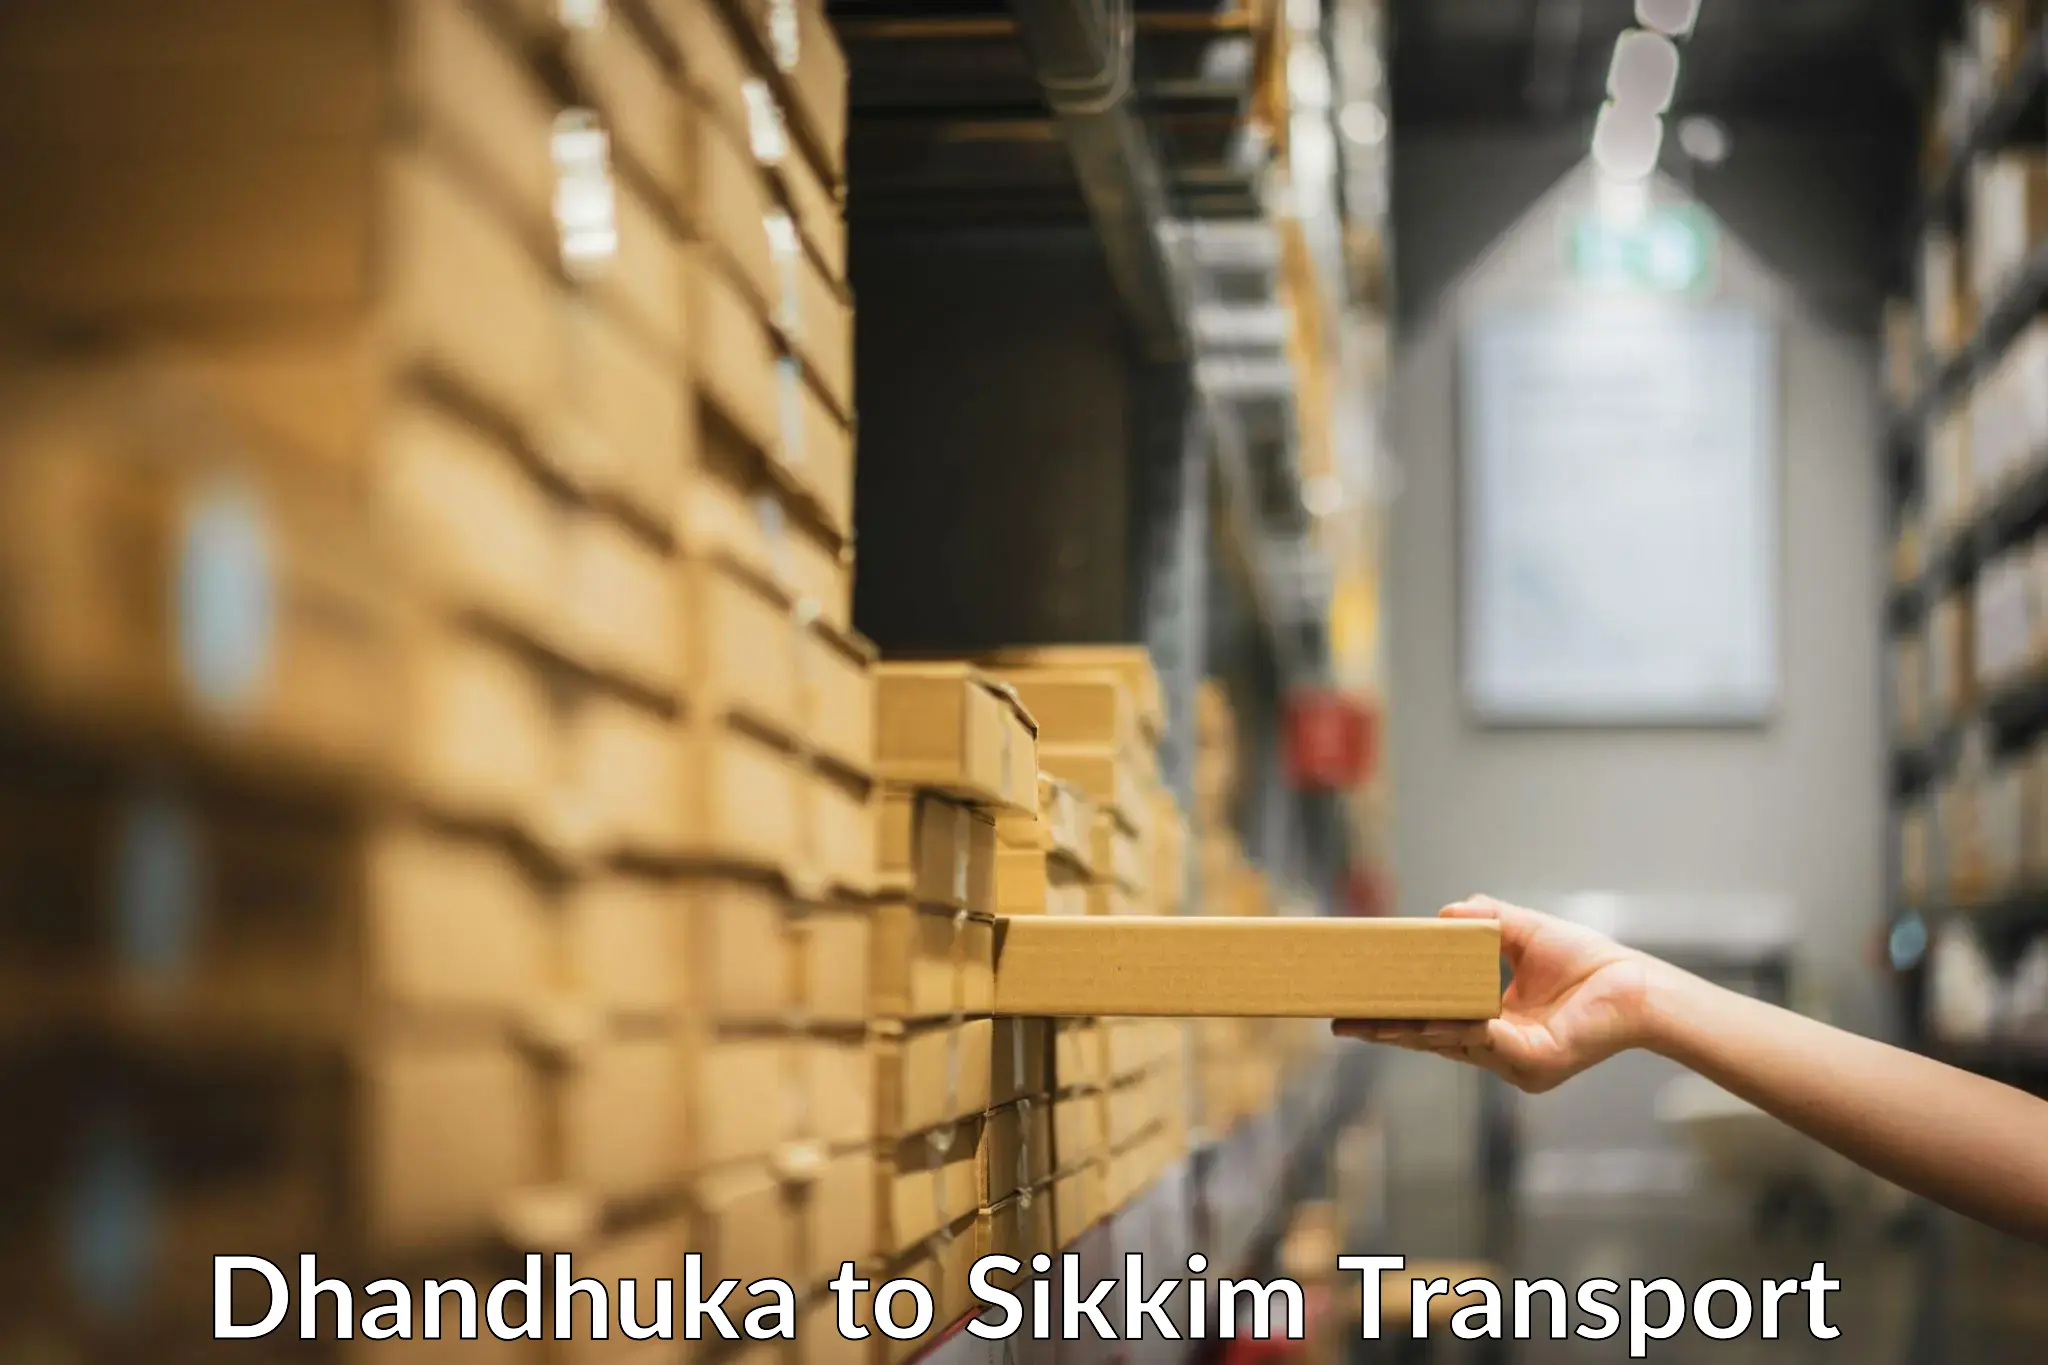 Delivery service Dhandhuka to Sikkim